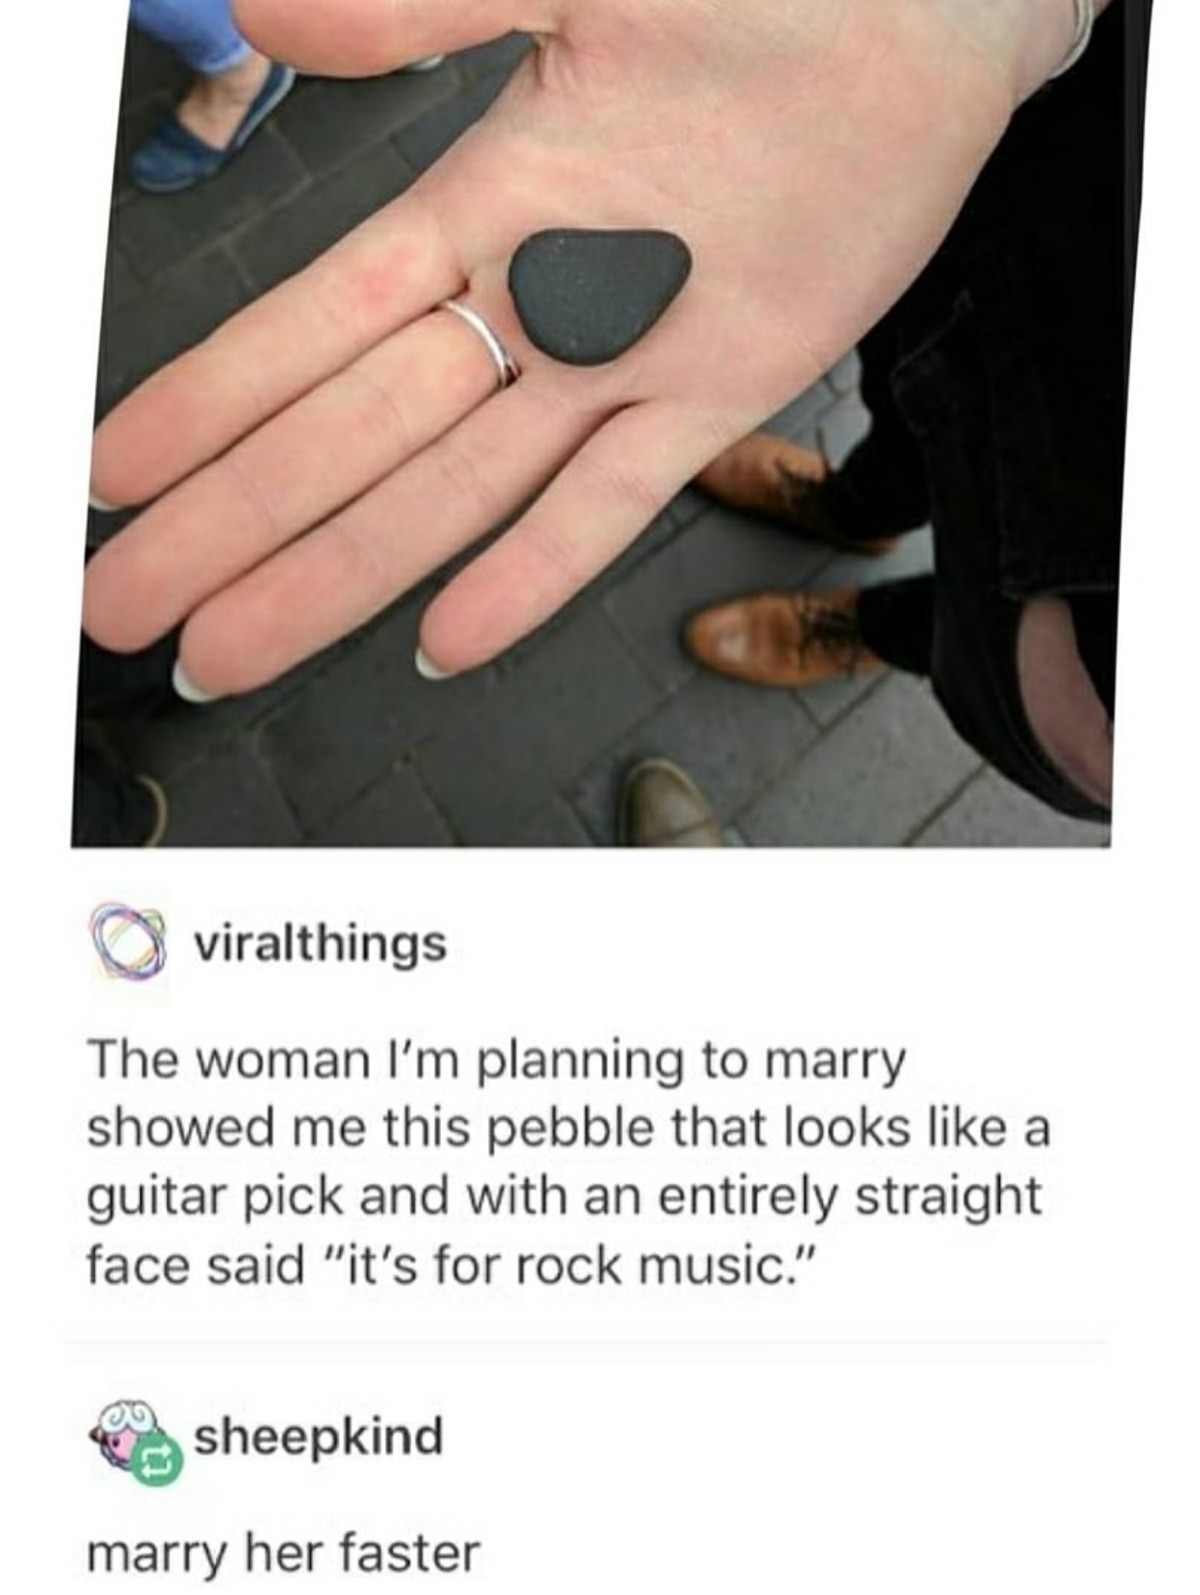 marry her faster - O viralthings The woman I'm planning to marry showed me this pebble that looks a guitar pick and with an entirely straight face said "it's for rock music." sheepkind marry her faster